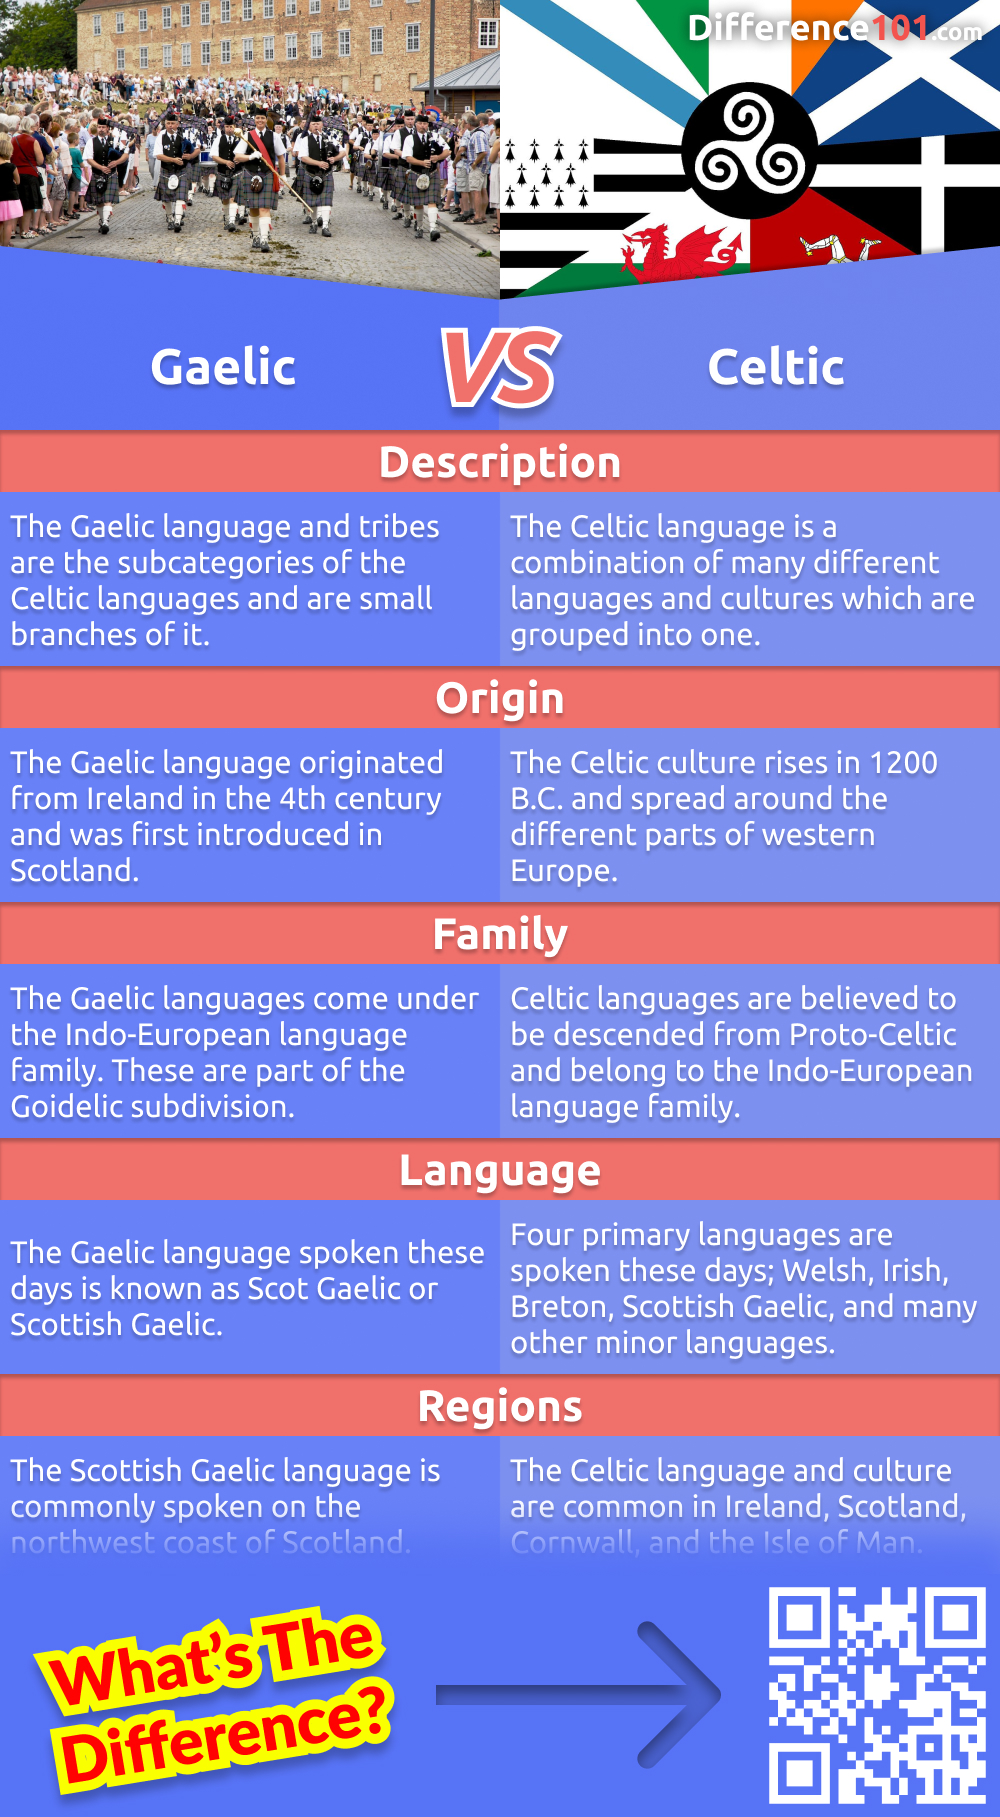 What's the difference between Gaelic and Celtic? Gaelic is a language spoken in Ireland, Scotland, and the Isle of Man, while Celtic refers to a cultural identity. Read more to learn about their differences.